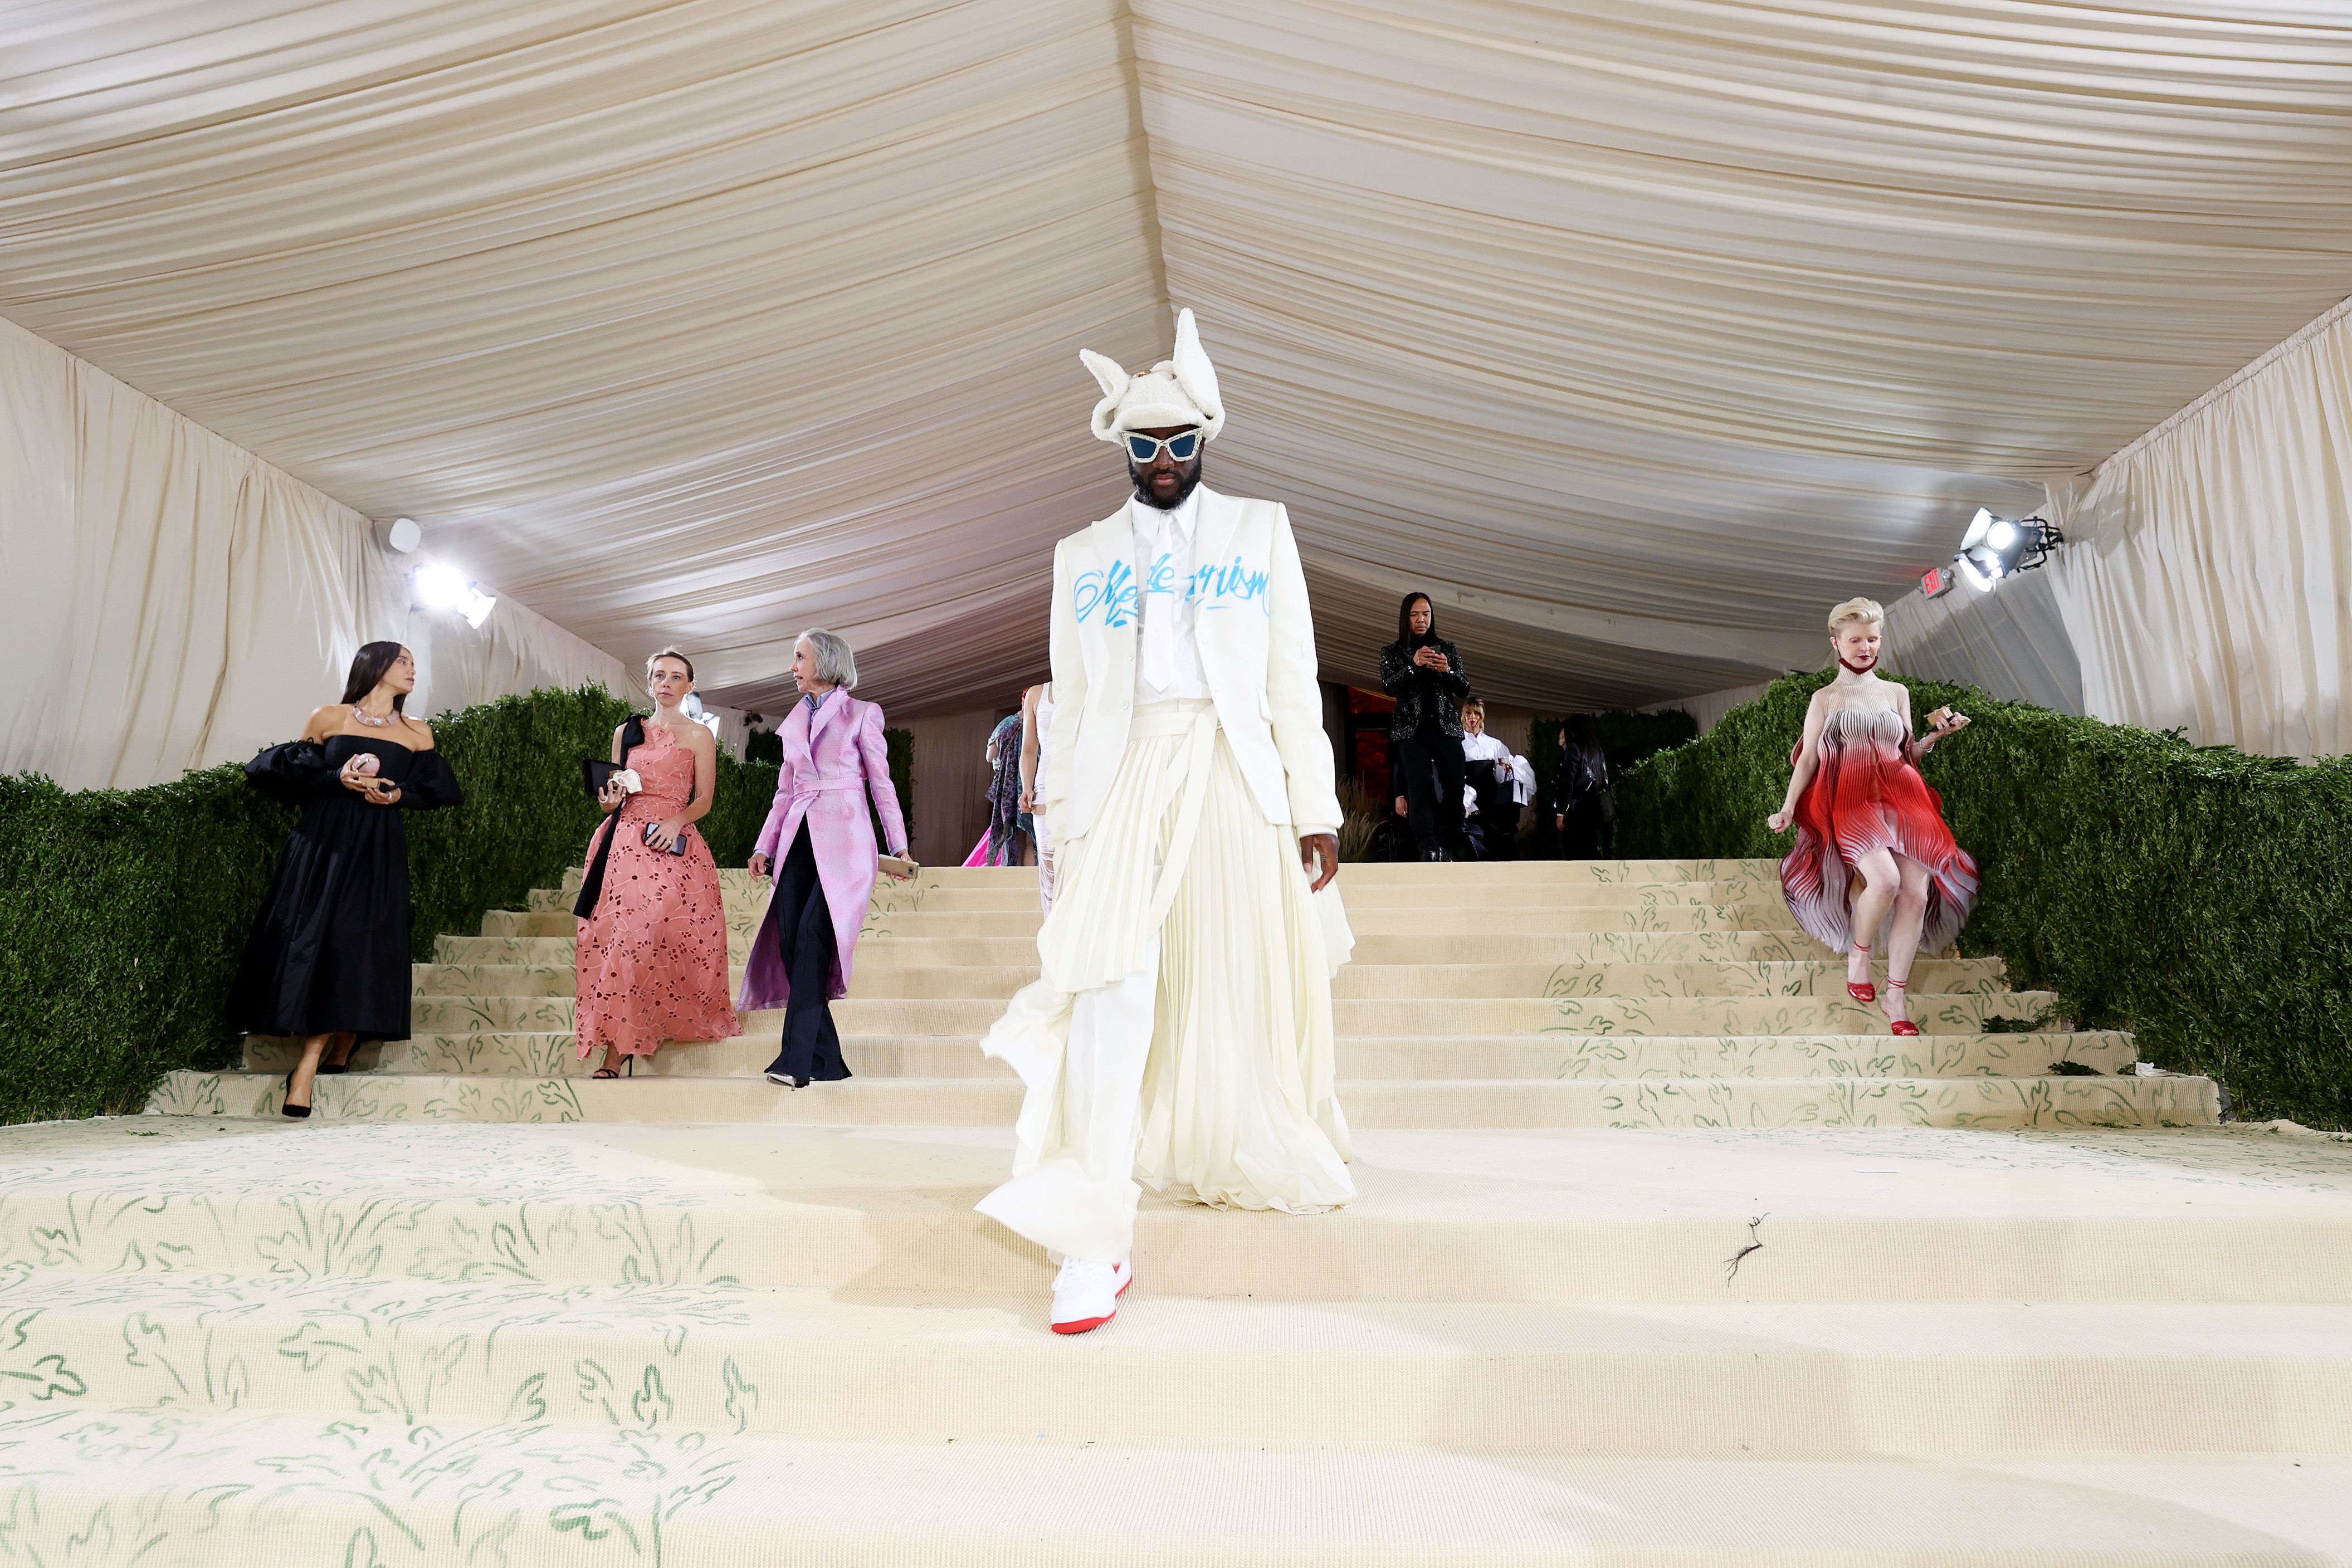 Louis Vuitton & Virgil Abloh: The Watershed Moment That May Prove You've  Just Thrown Out A Lot of Money By Investing in a Fashion Education -  Irenebrination: Notes on Architecture, Art, Fashion